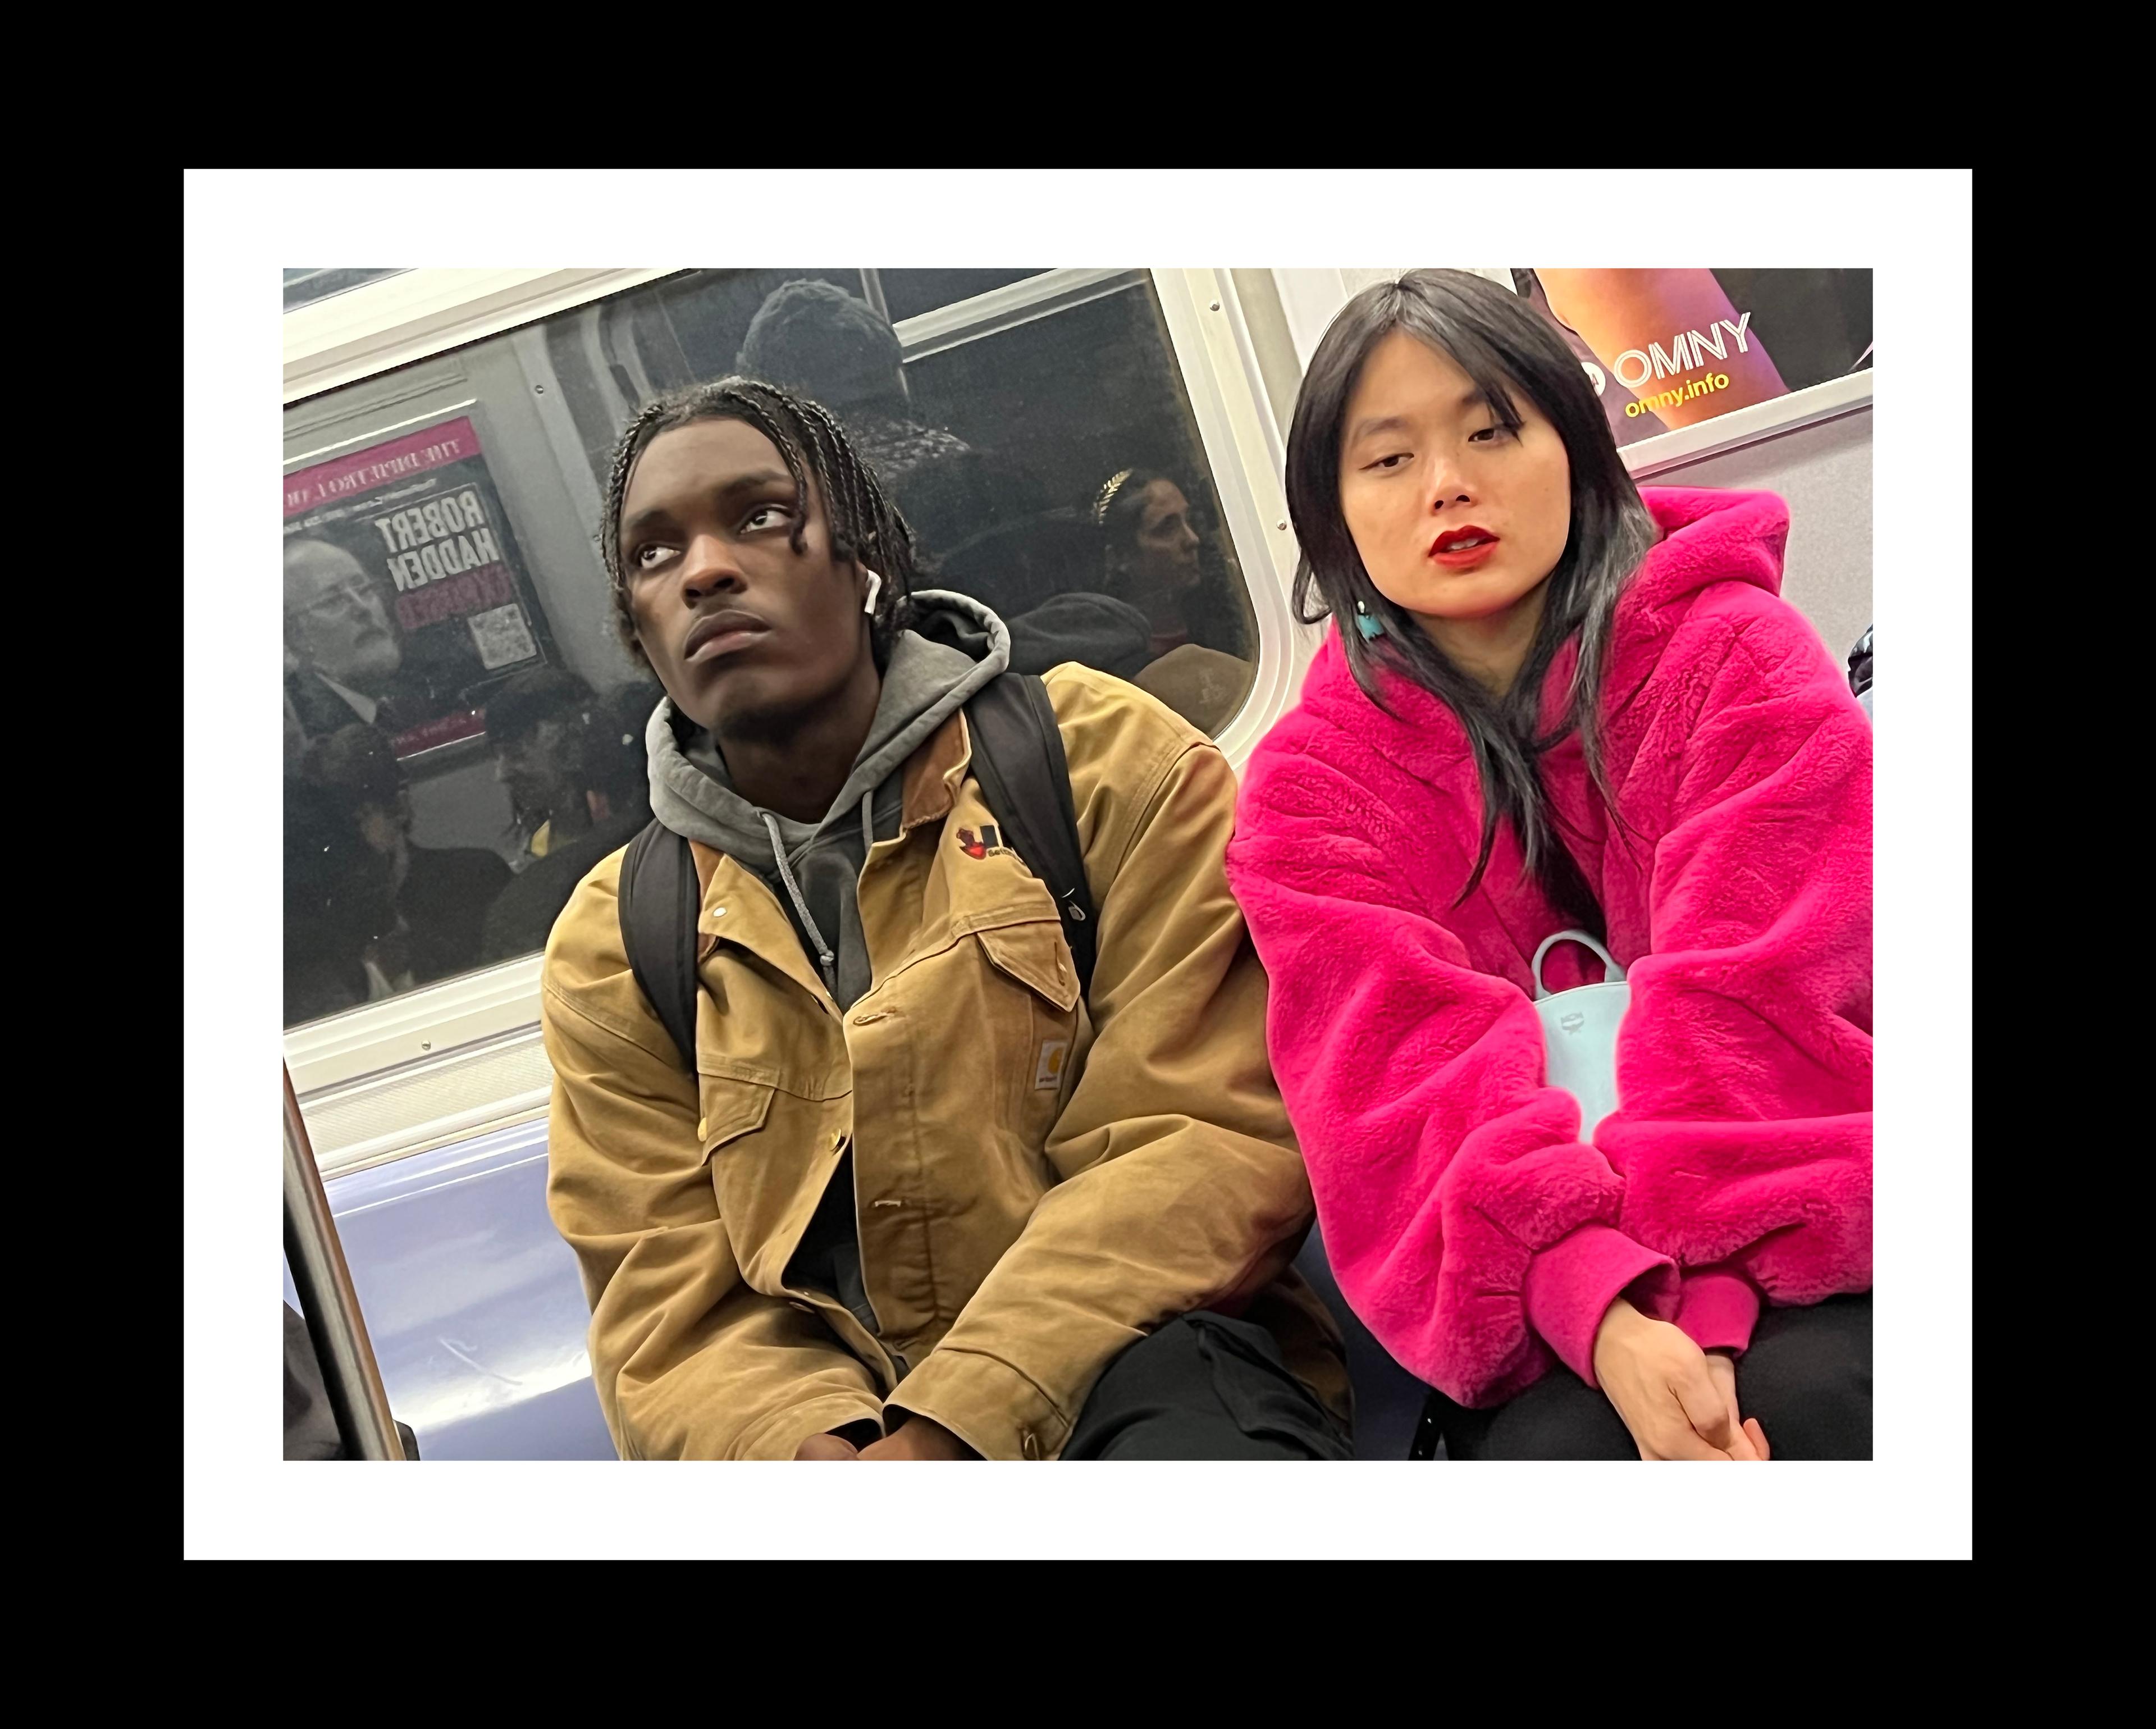 Color photograph of an adolescent Black male and Asian female sitting next to each other on a subway car. The male is looking up, the female is looking down. Both have their hands crossed in their laps. The Black teen has braided hair and wears a brown jacket with black pants and black shoulder straps from a knapsack behind him. The Asian teen has shoulder-length black hair and wears a fuzzy magenta coat with a white purse cradled between her arms.